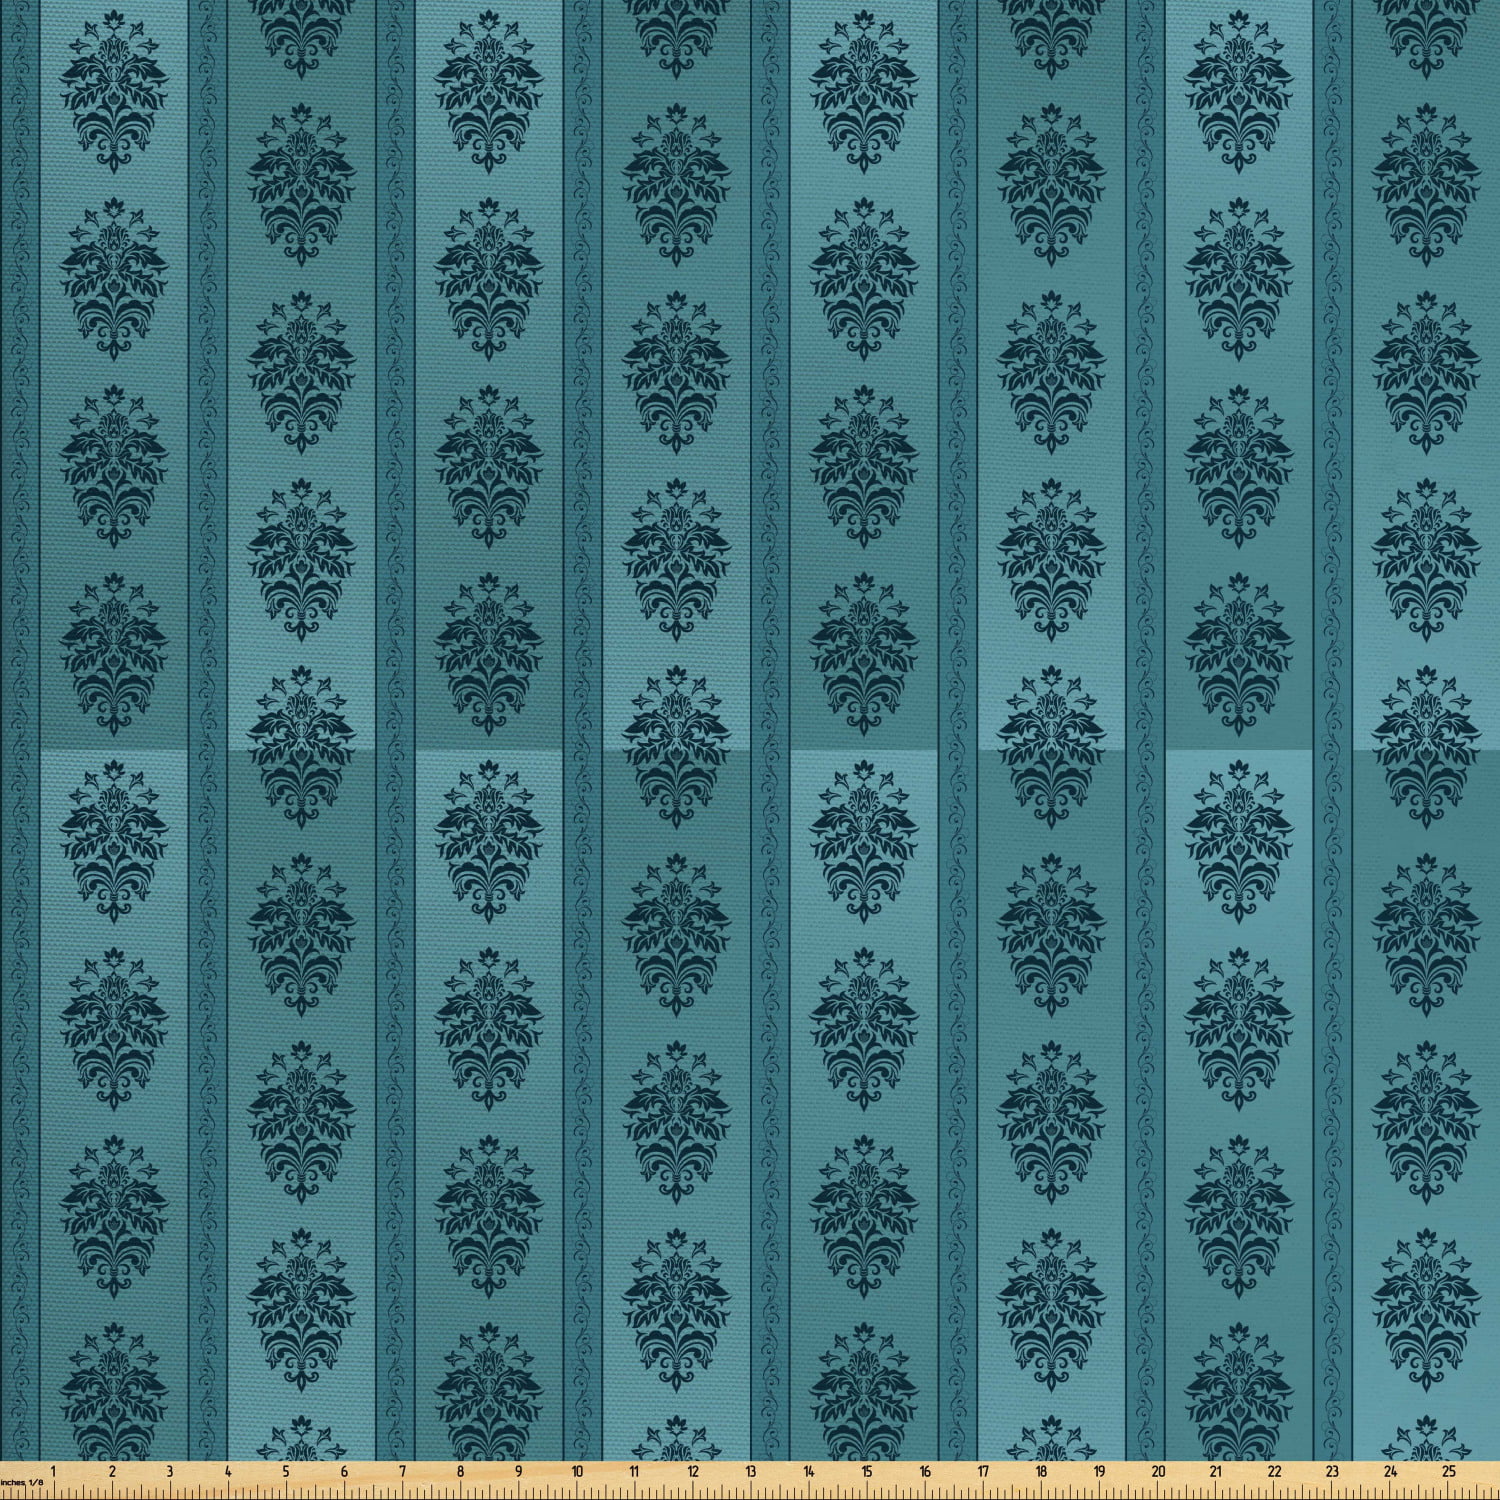 Damask Upholstery Fabric by the Yard, Medieval Gothic Rococo Art Motifs on  Vertical Stripes Cultures Inspiration, Decorative Fabric for DIY and Home  Accents, Petrol Blue by Ambesonne 